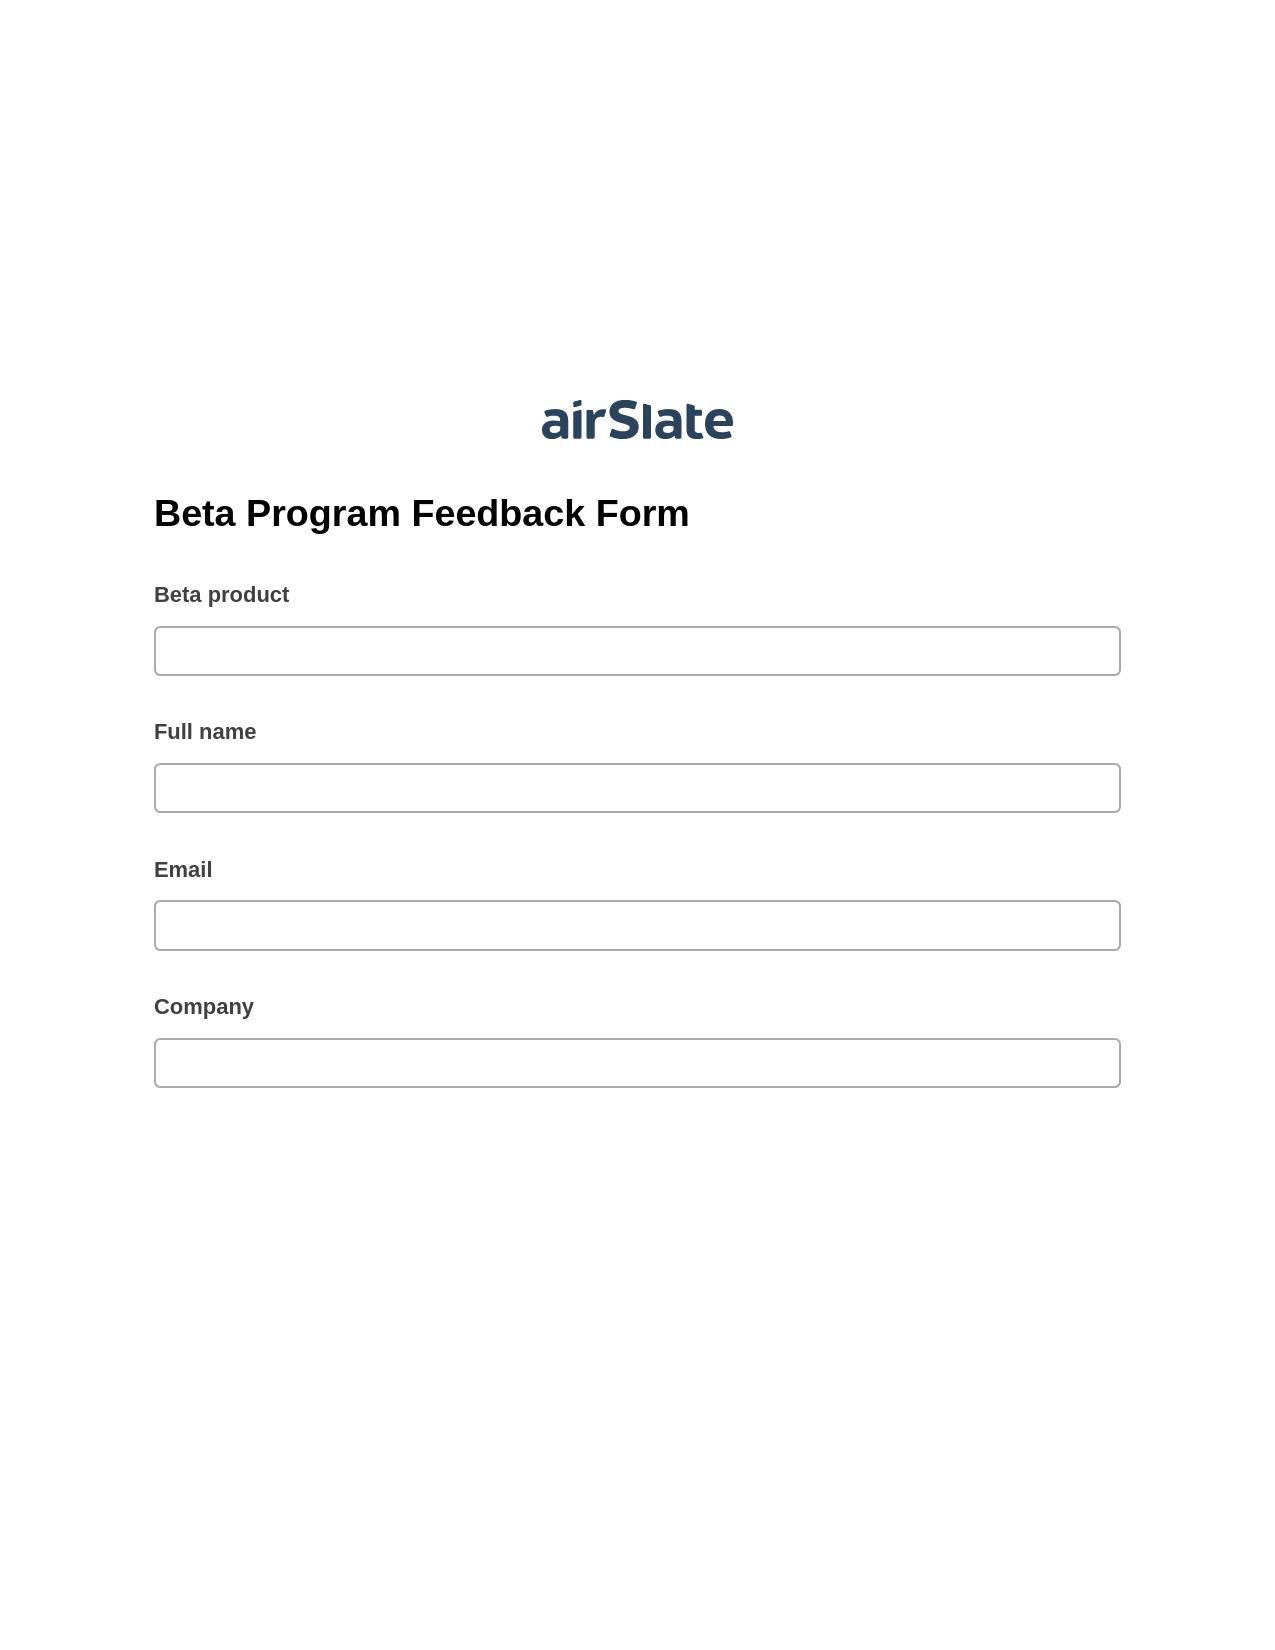 Multirole Beta Program Feedback Form Pre-fill Dropdowns from Excel Bot, Remove Tags From Slate Bot, Export to Smartsheet